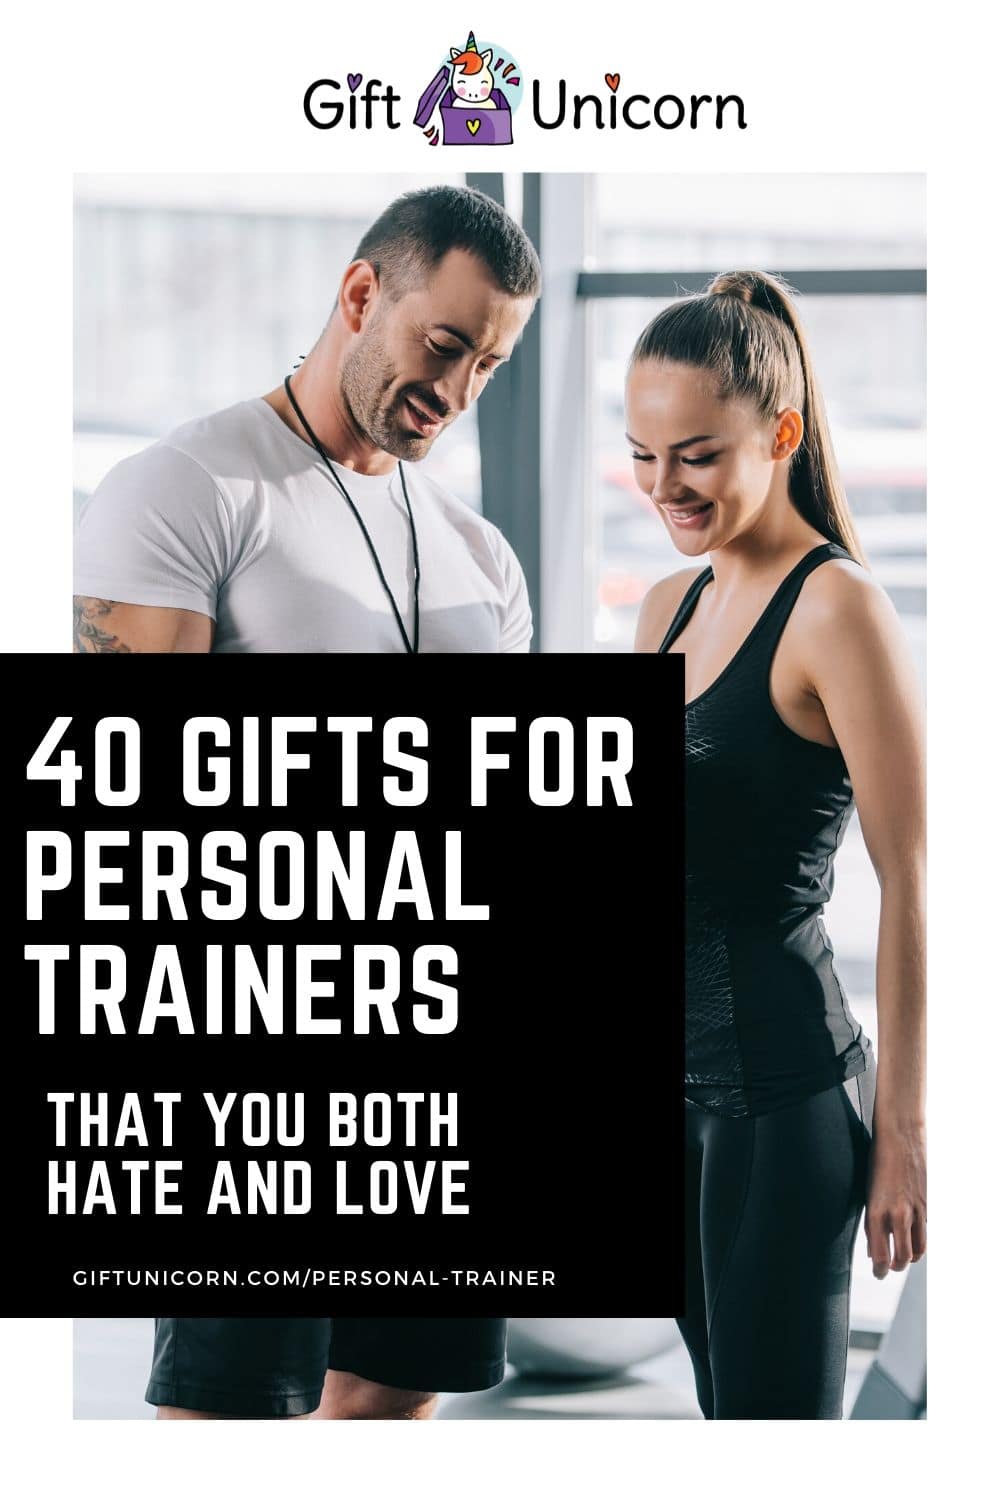 40 gifts for personal trainers pin image